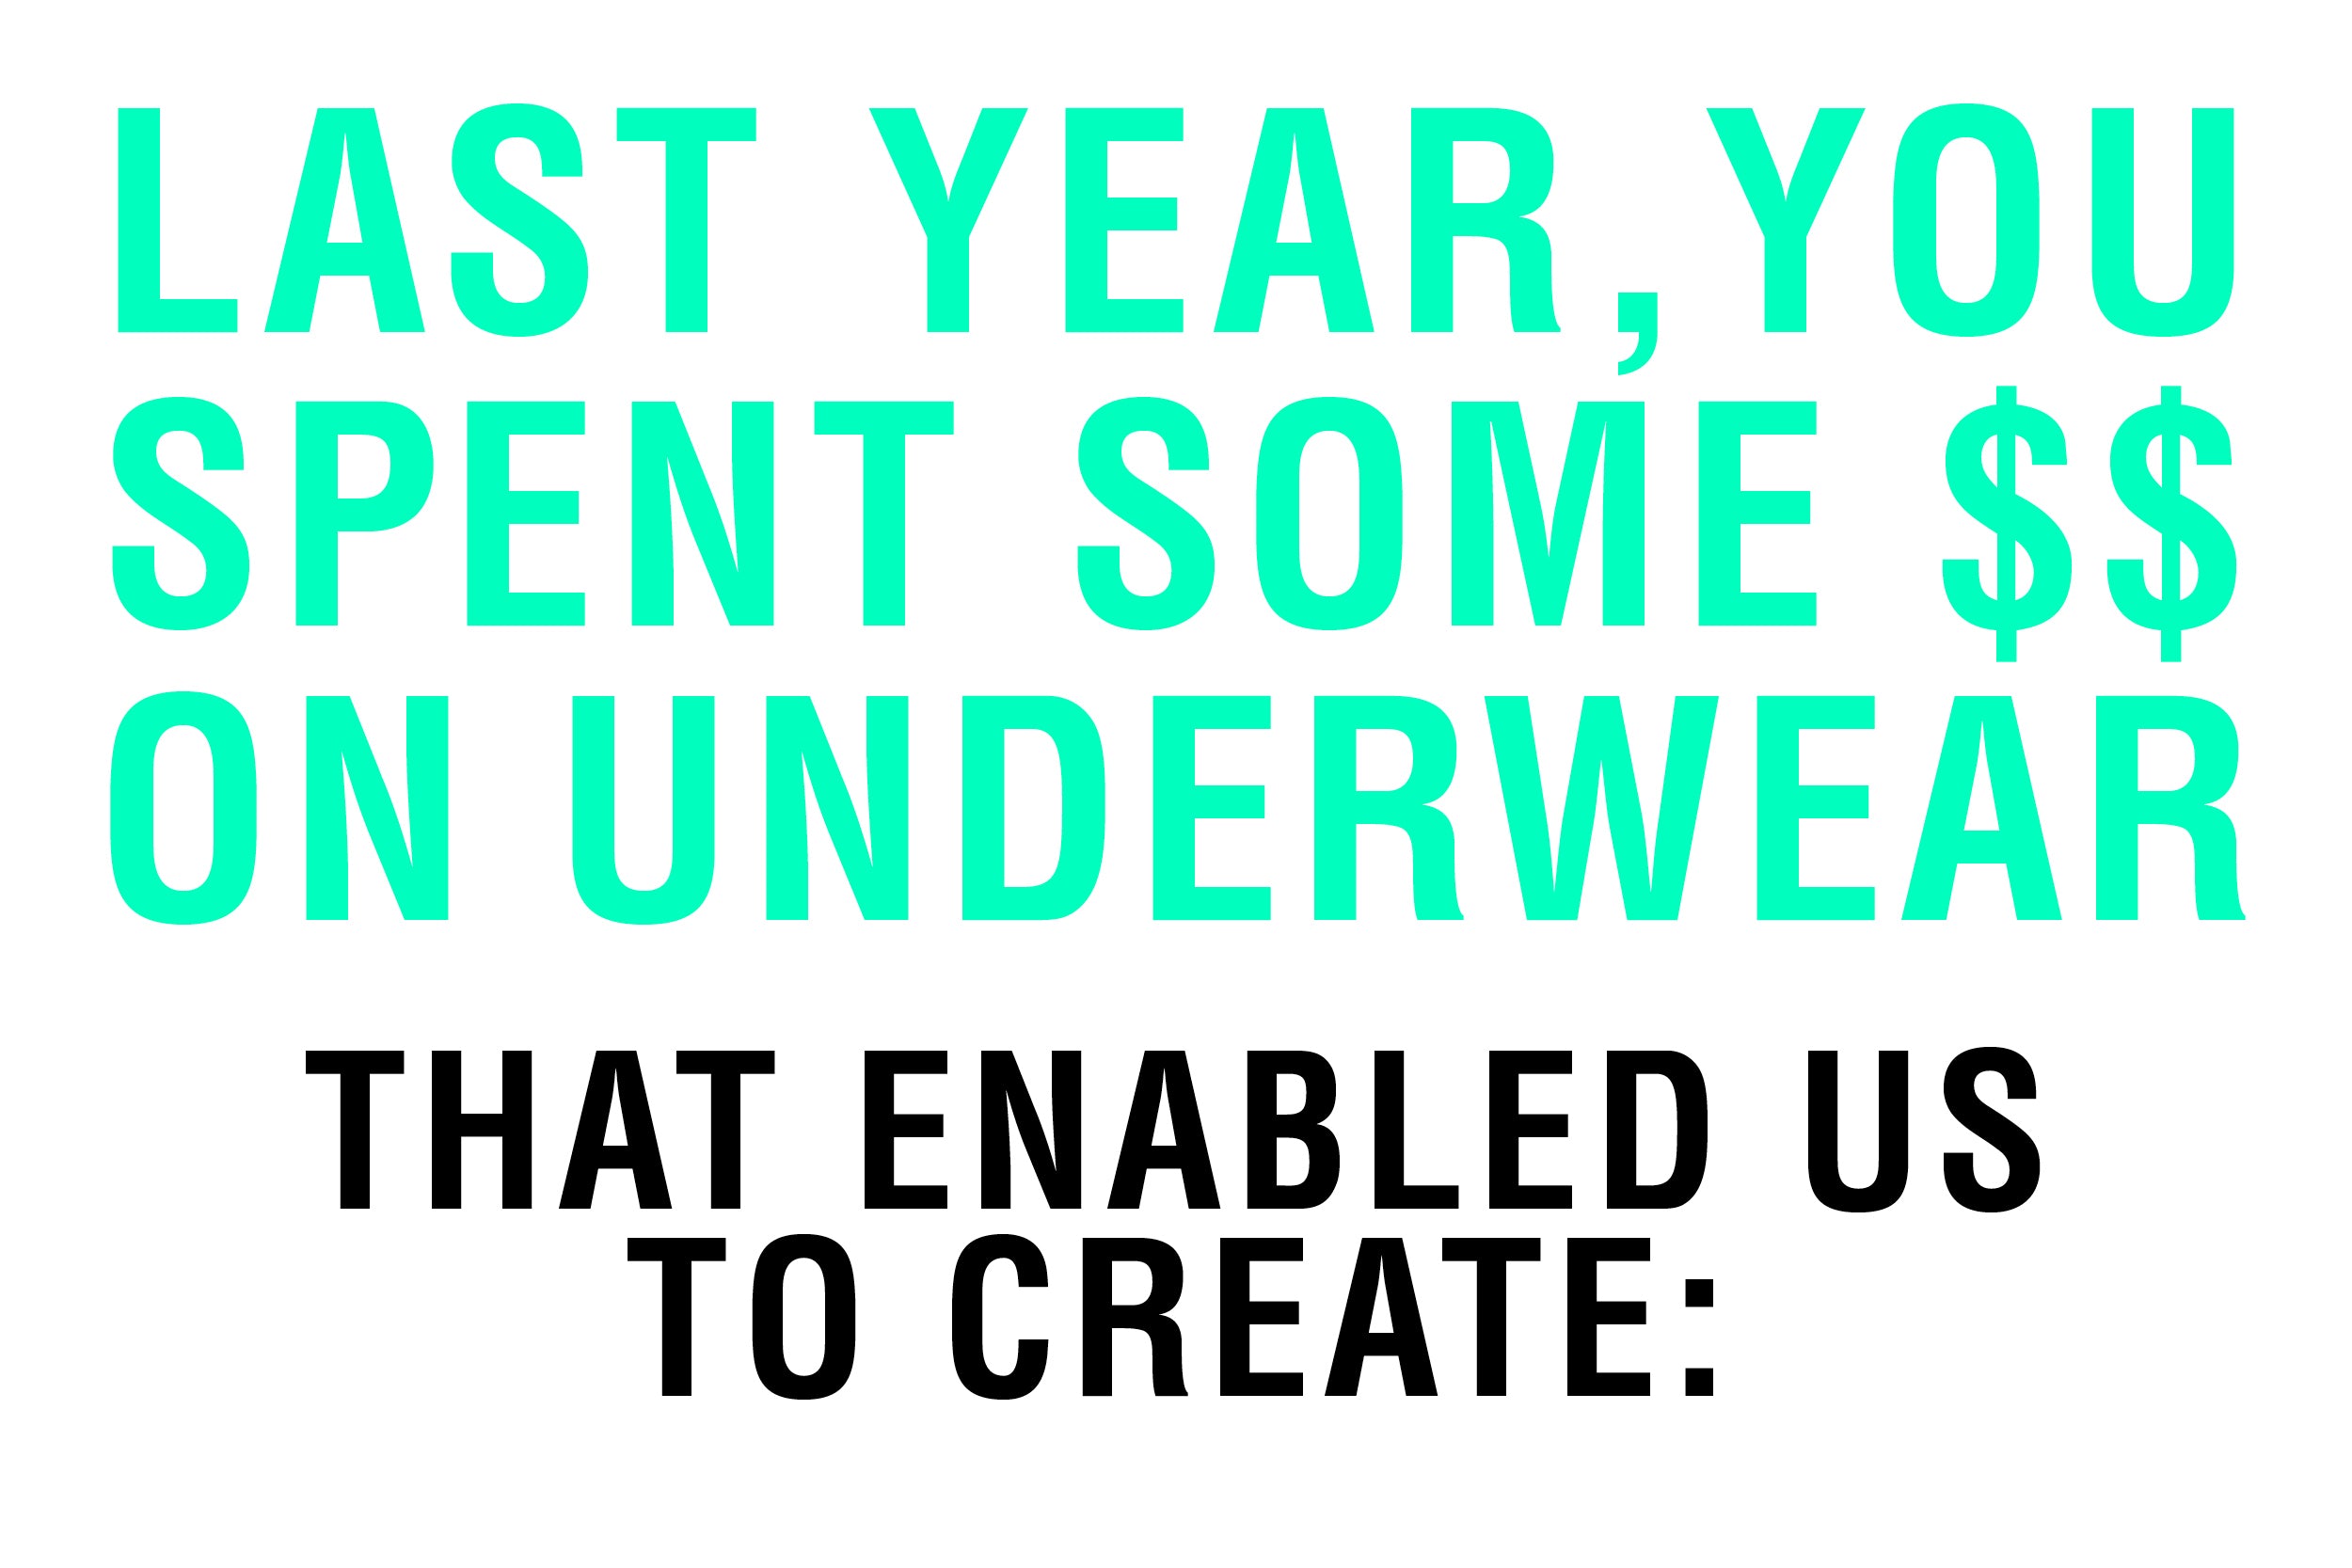 Last year you spent some $$ on underwear. That enabled us to create: